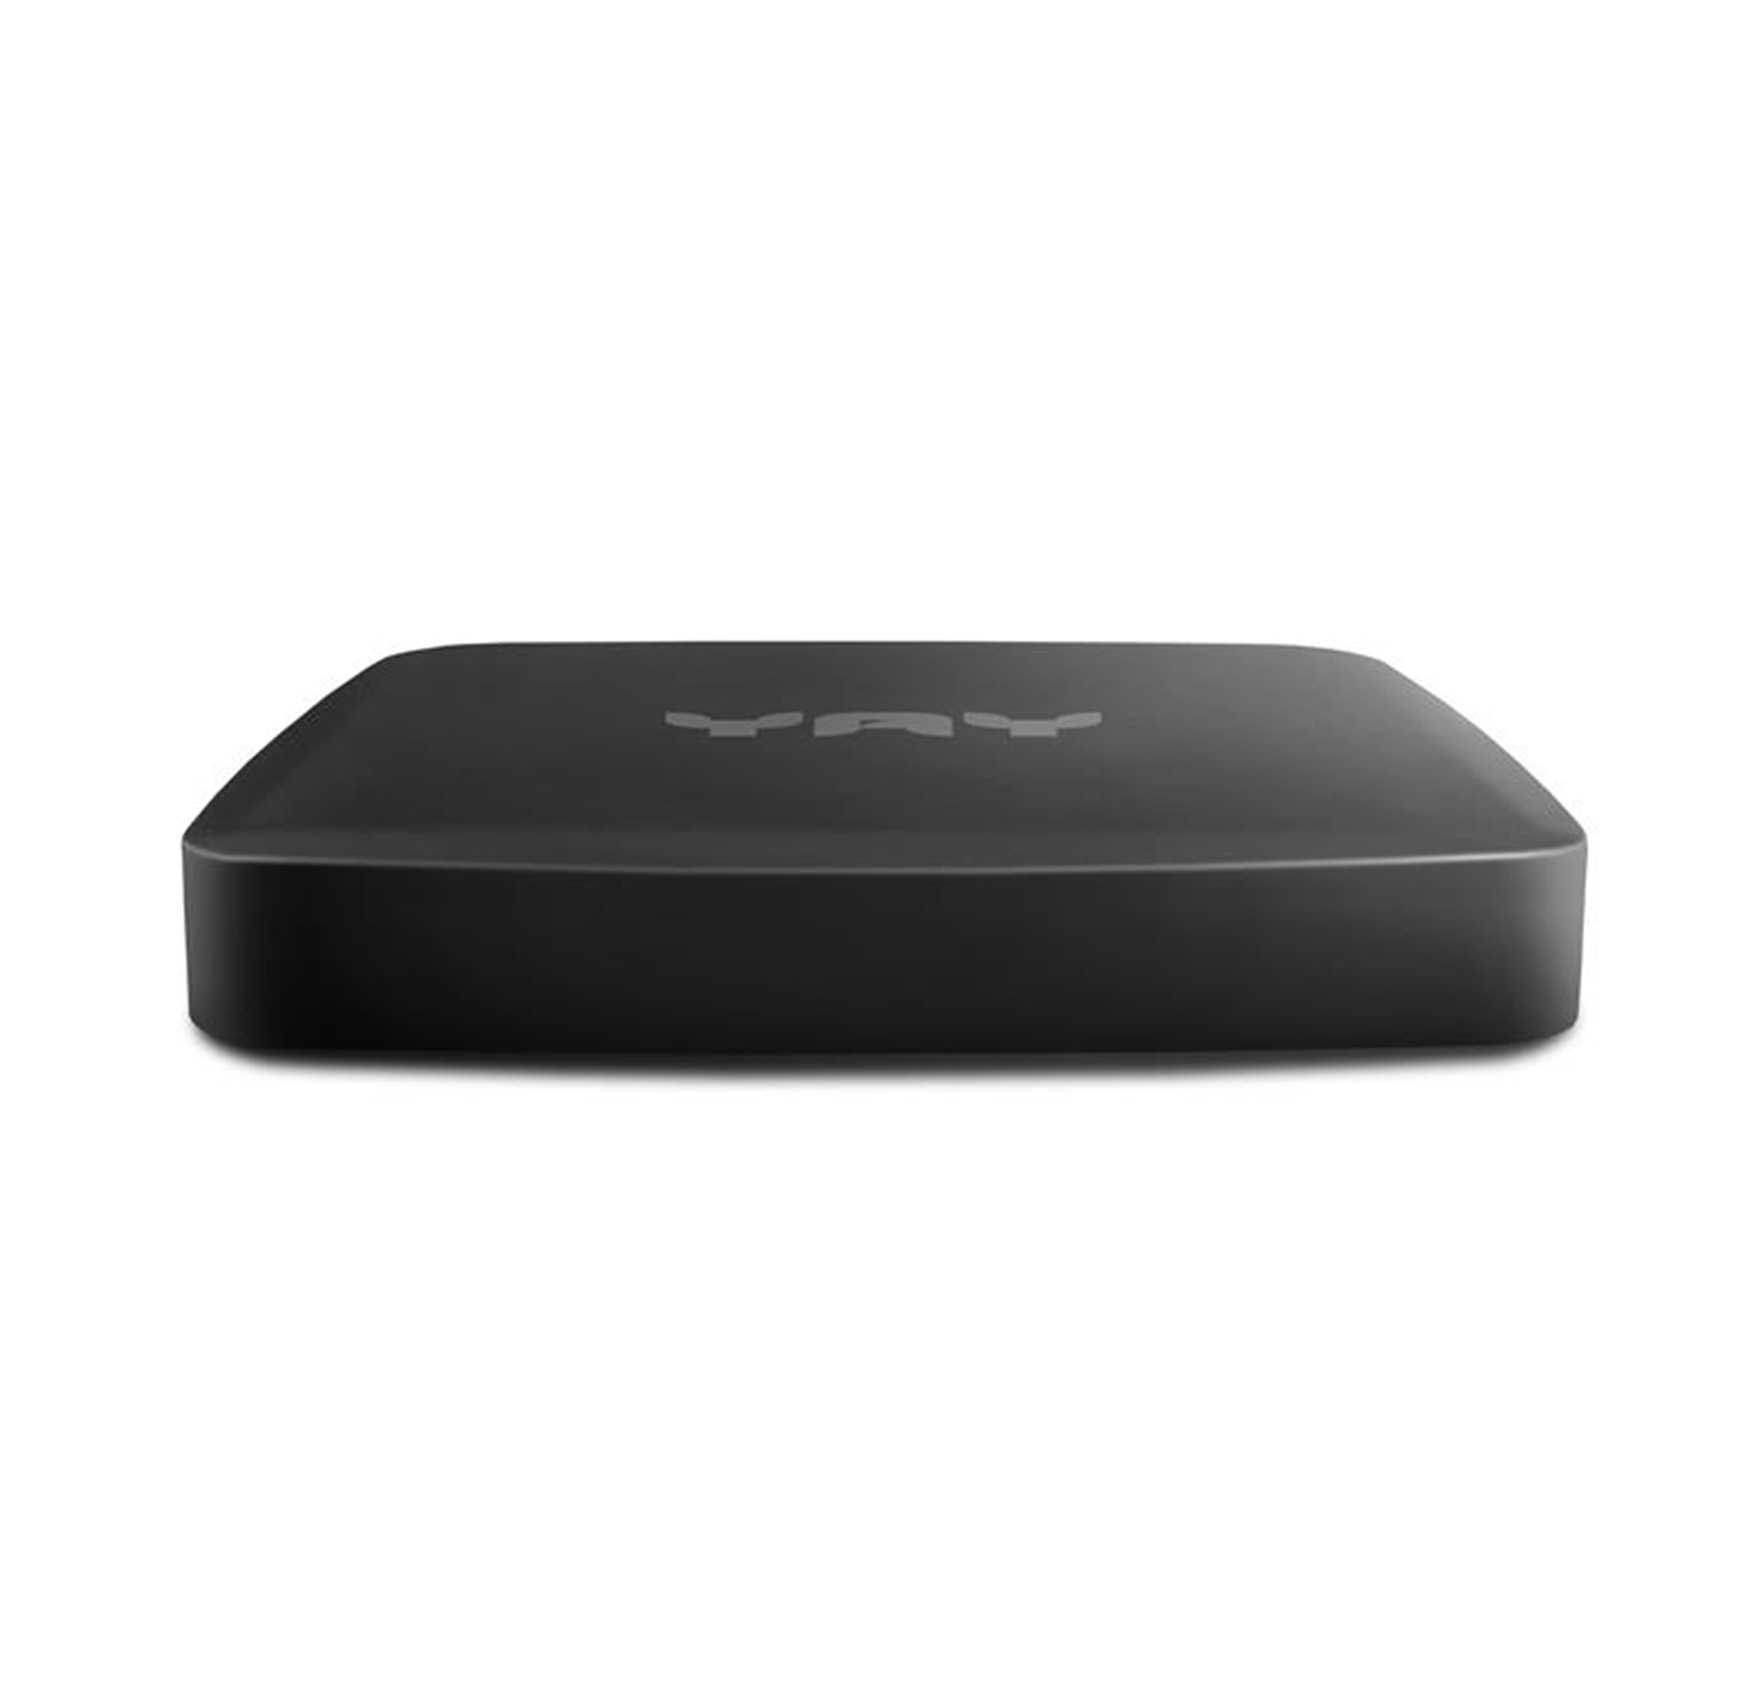 VU+ YAY GO PRO Android TV HIGH-END 4K UHD Streaming Box